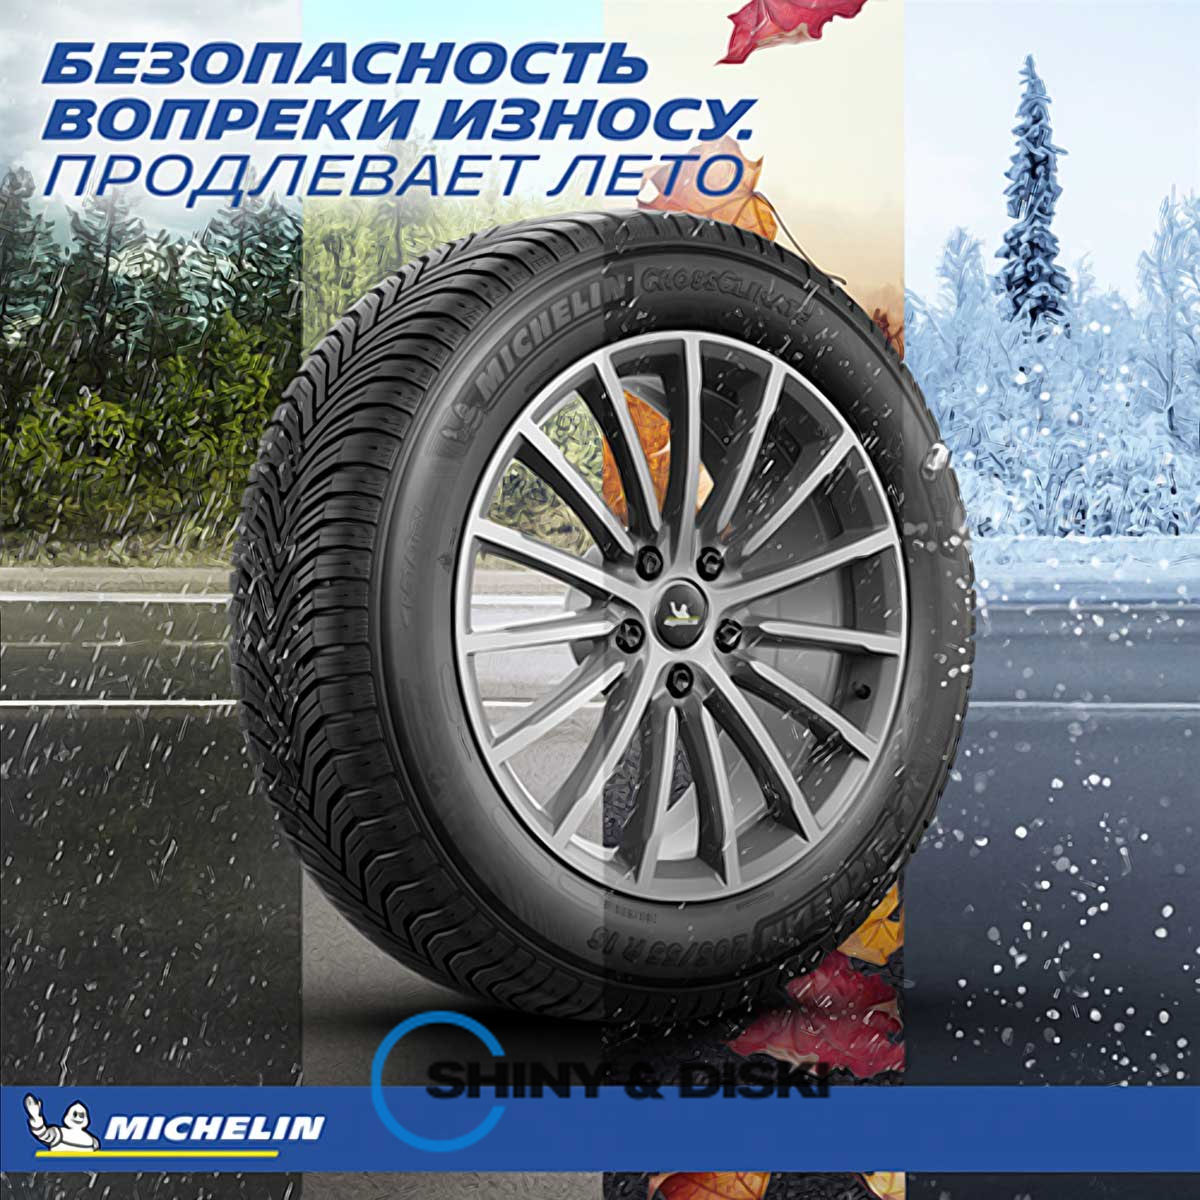 покрышки michelin cross climate+ 195/65 r15 91h